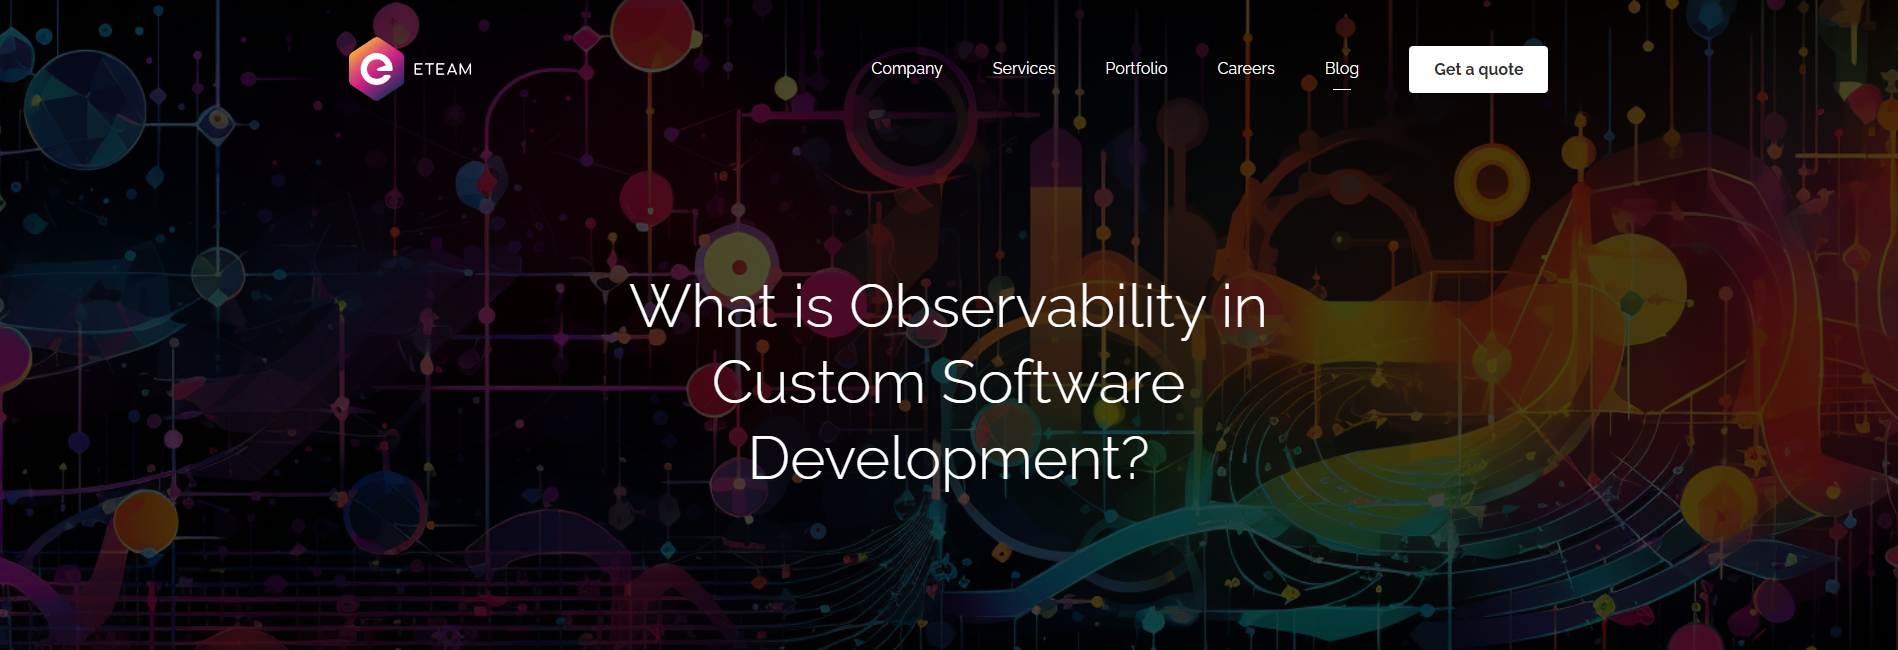 Cover image of ETEAM article on what is observability in custom software development.